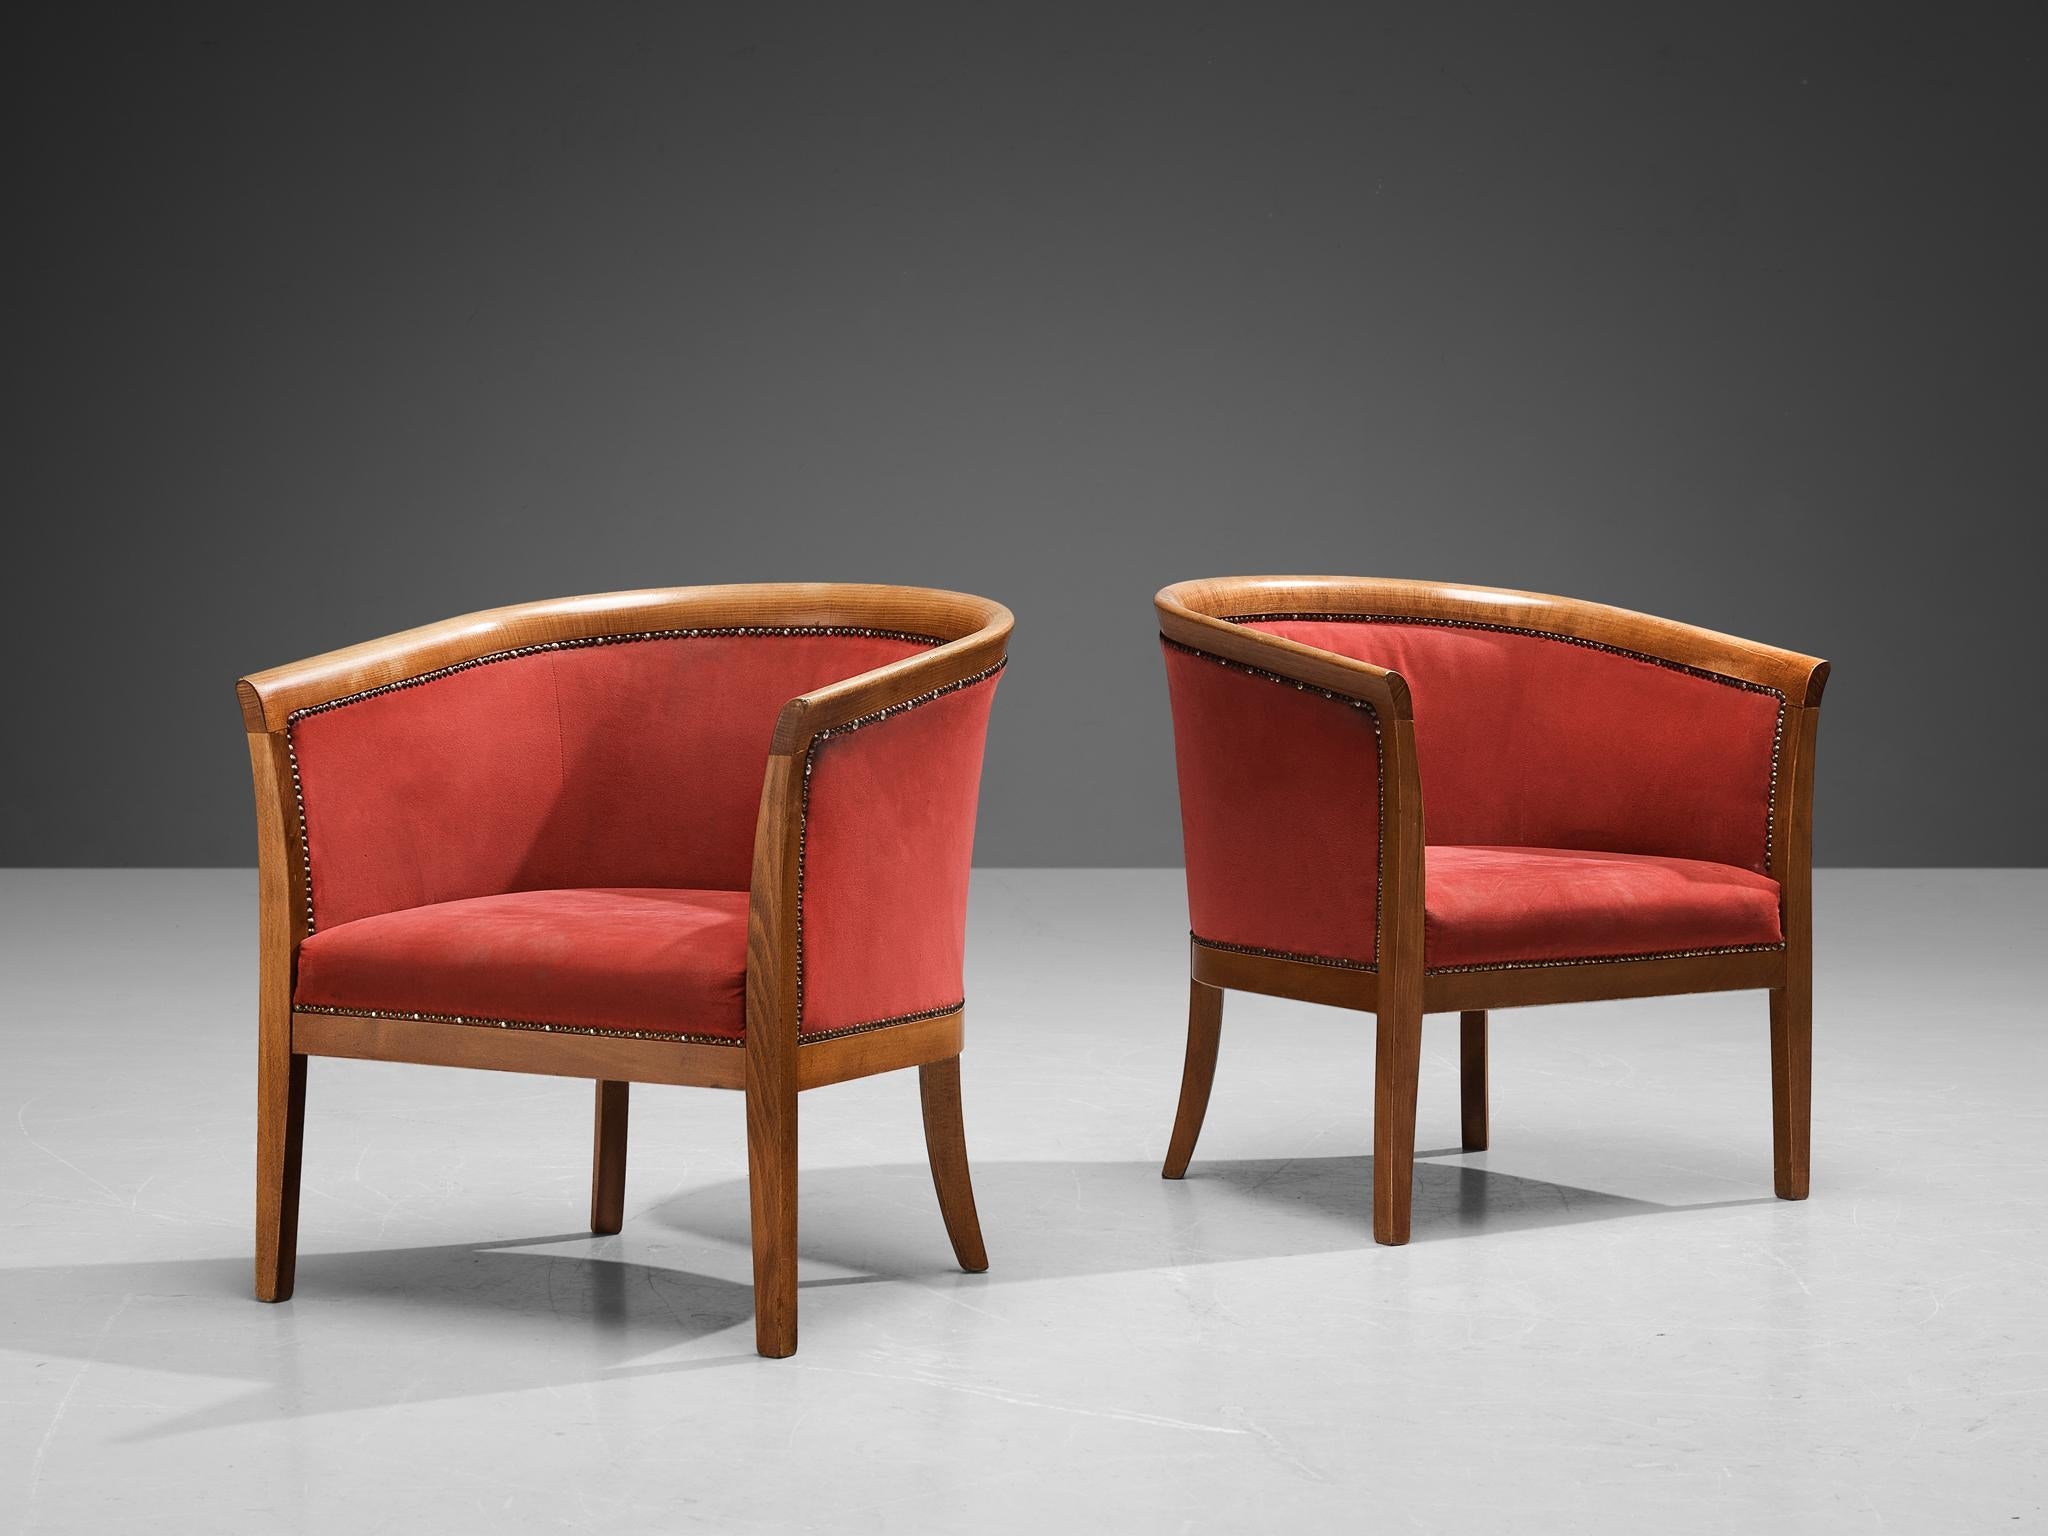 French Club Chairs in Red Upholstery